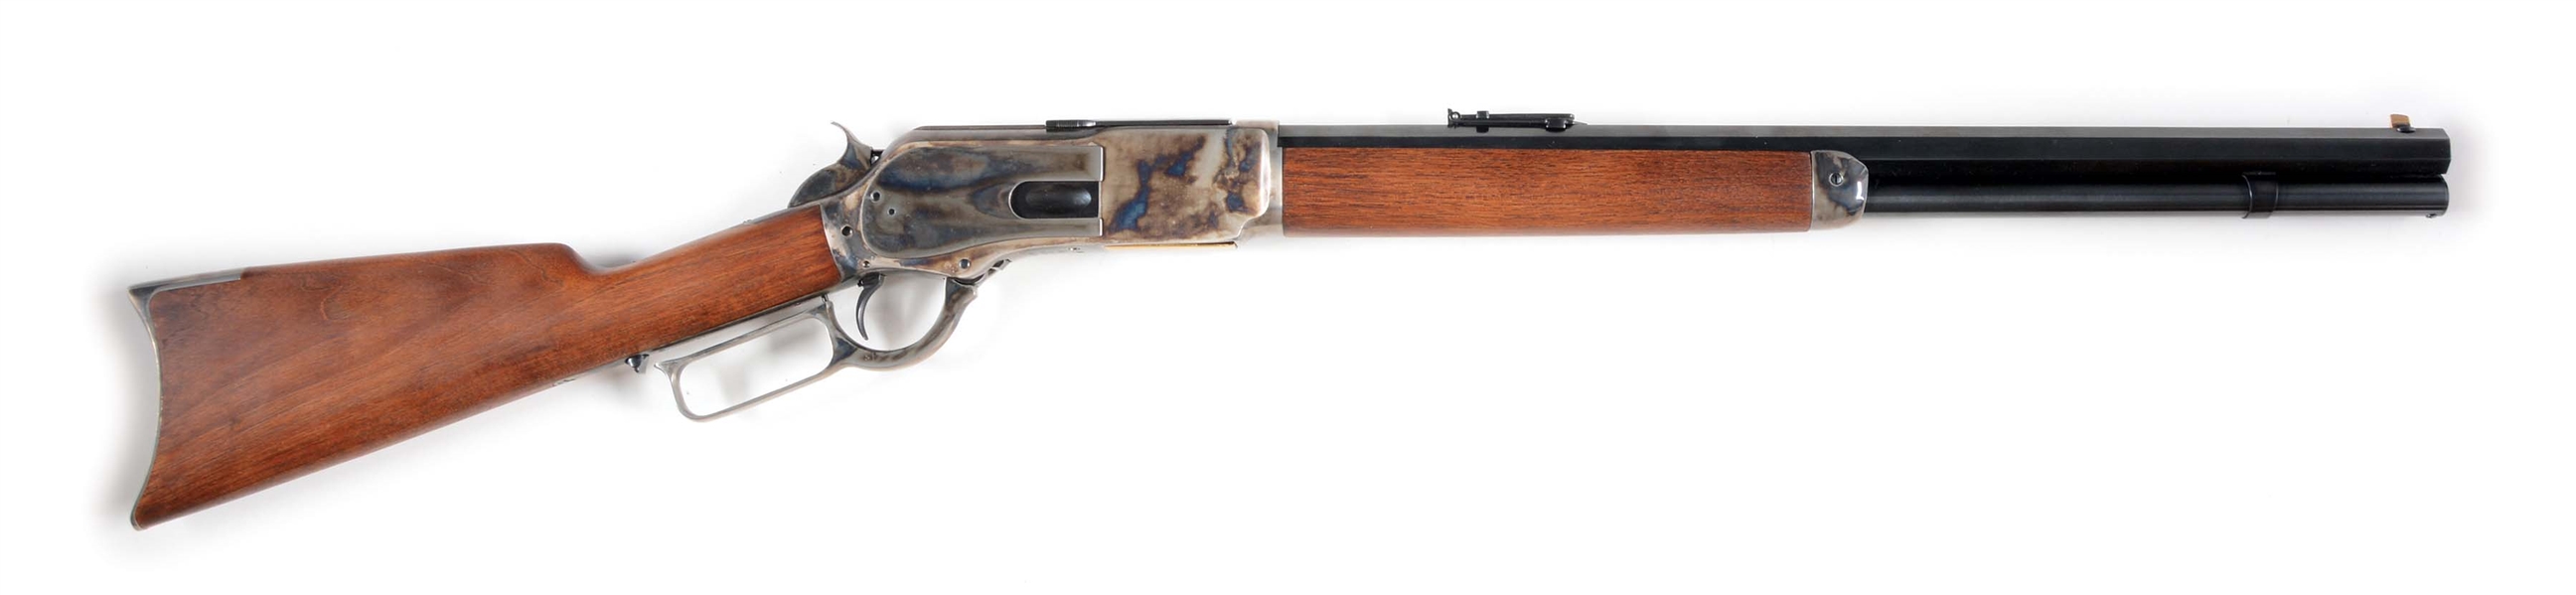 (M) CHAPPARAL 1876 LEVER ACTION RIFLE.